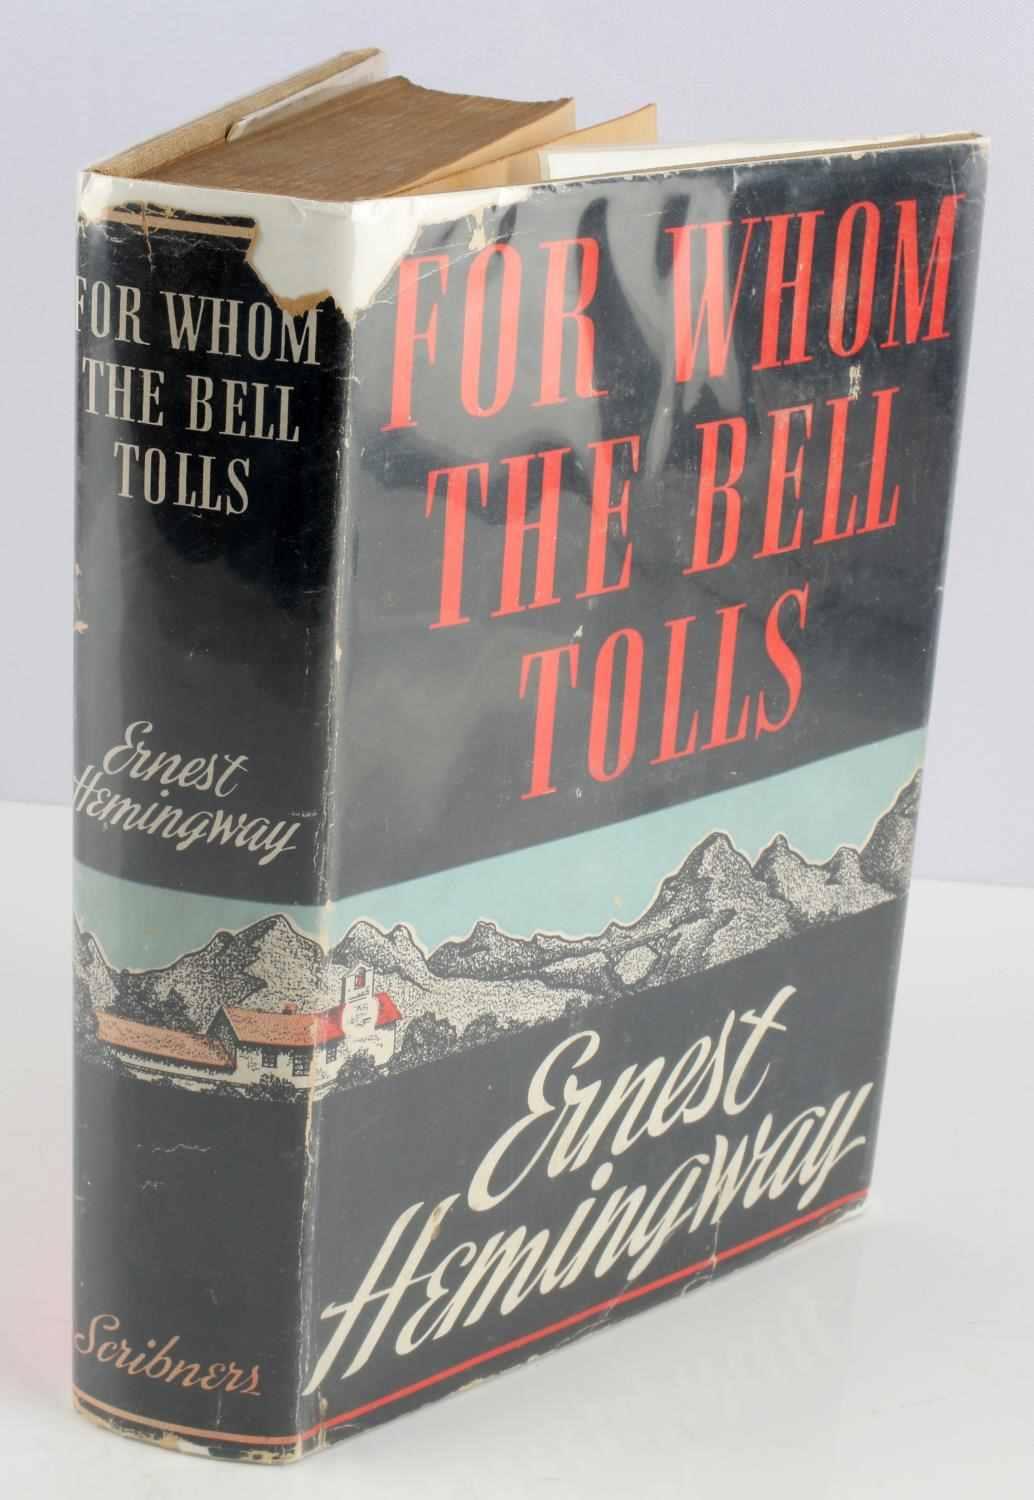 1ST ED ERNEST HEMINGWAY FOR WHOM THE BELL TOLLS